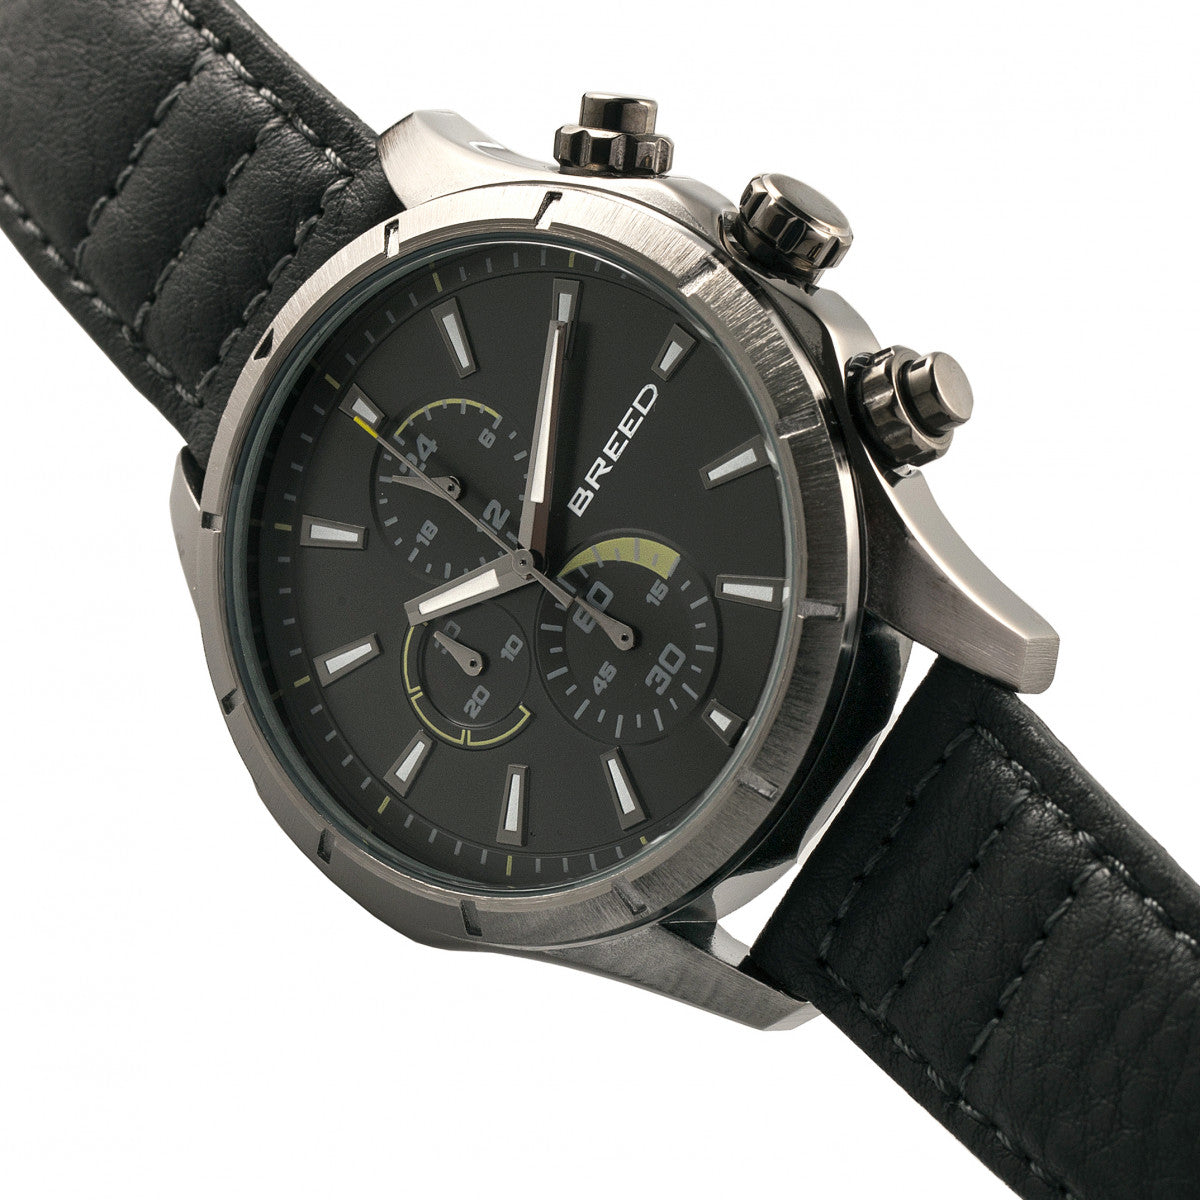 Breed Lacroix Chronograph Leather-Band Watch - Gunmetal/Charcoal - BRD6806